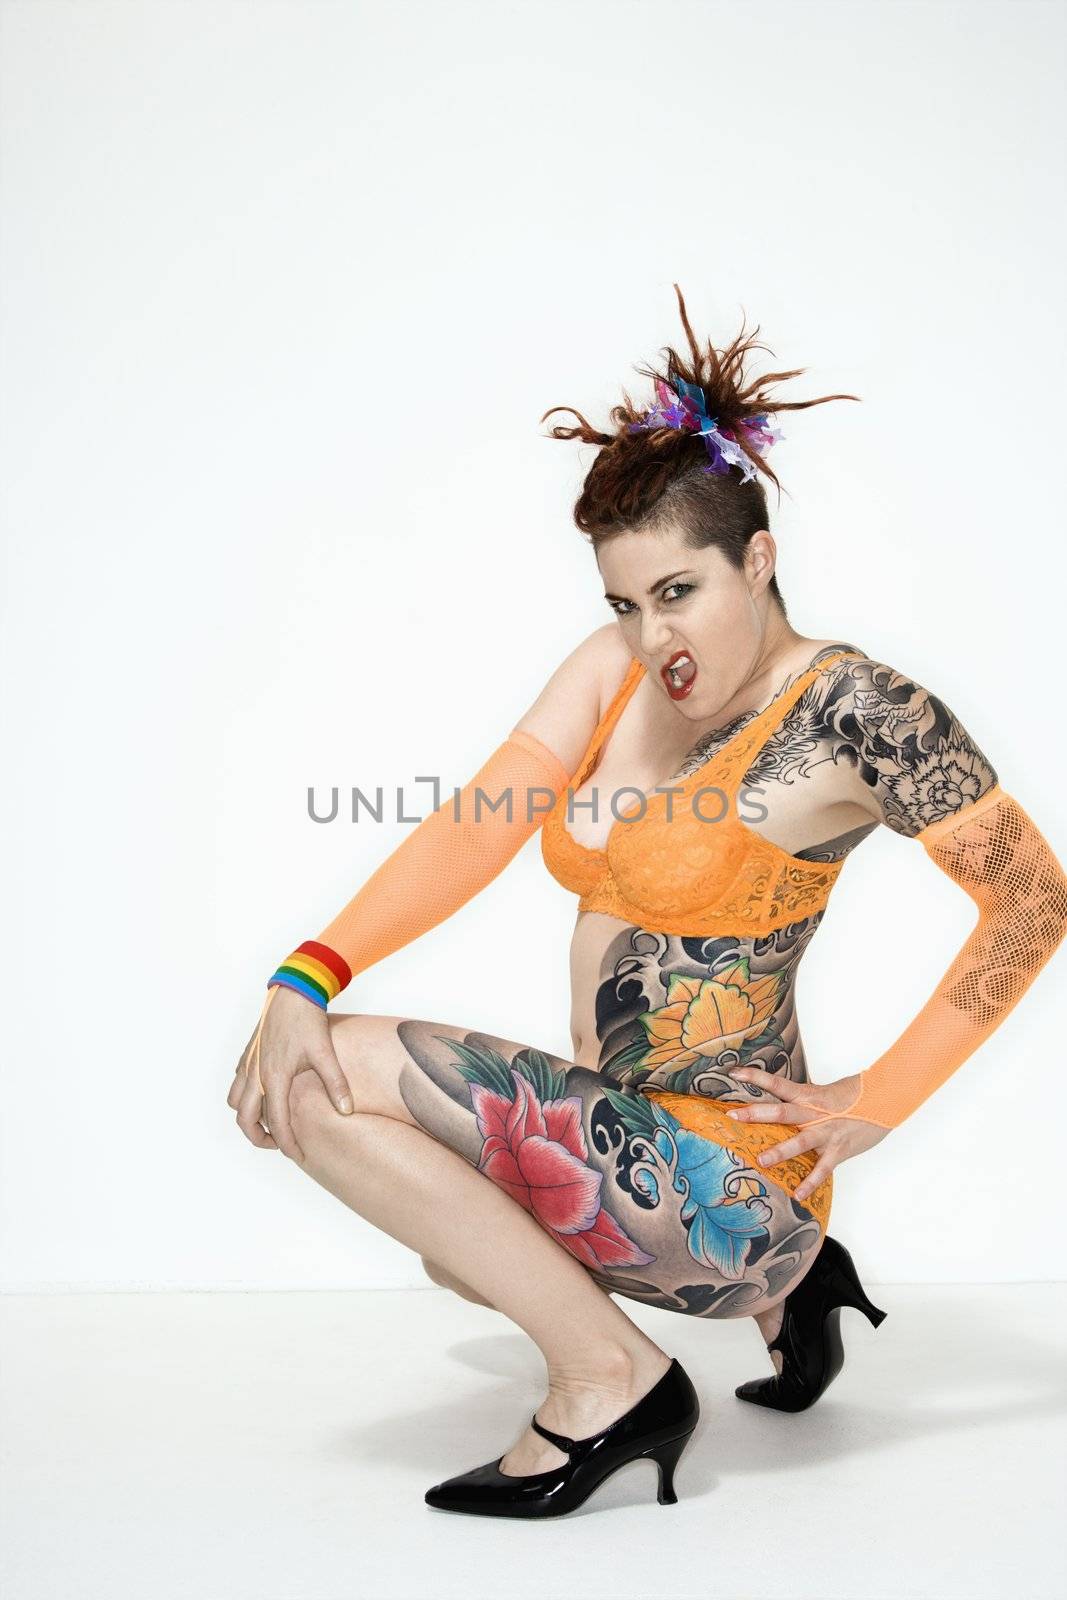 Adult caucasian woman with tattoos squatting on floor.